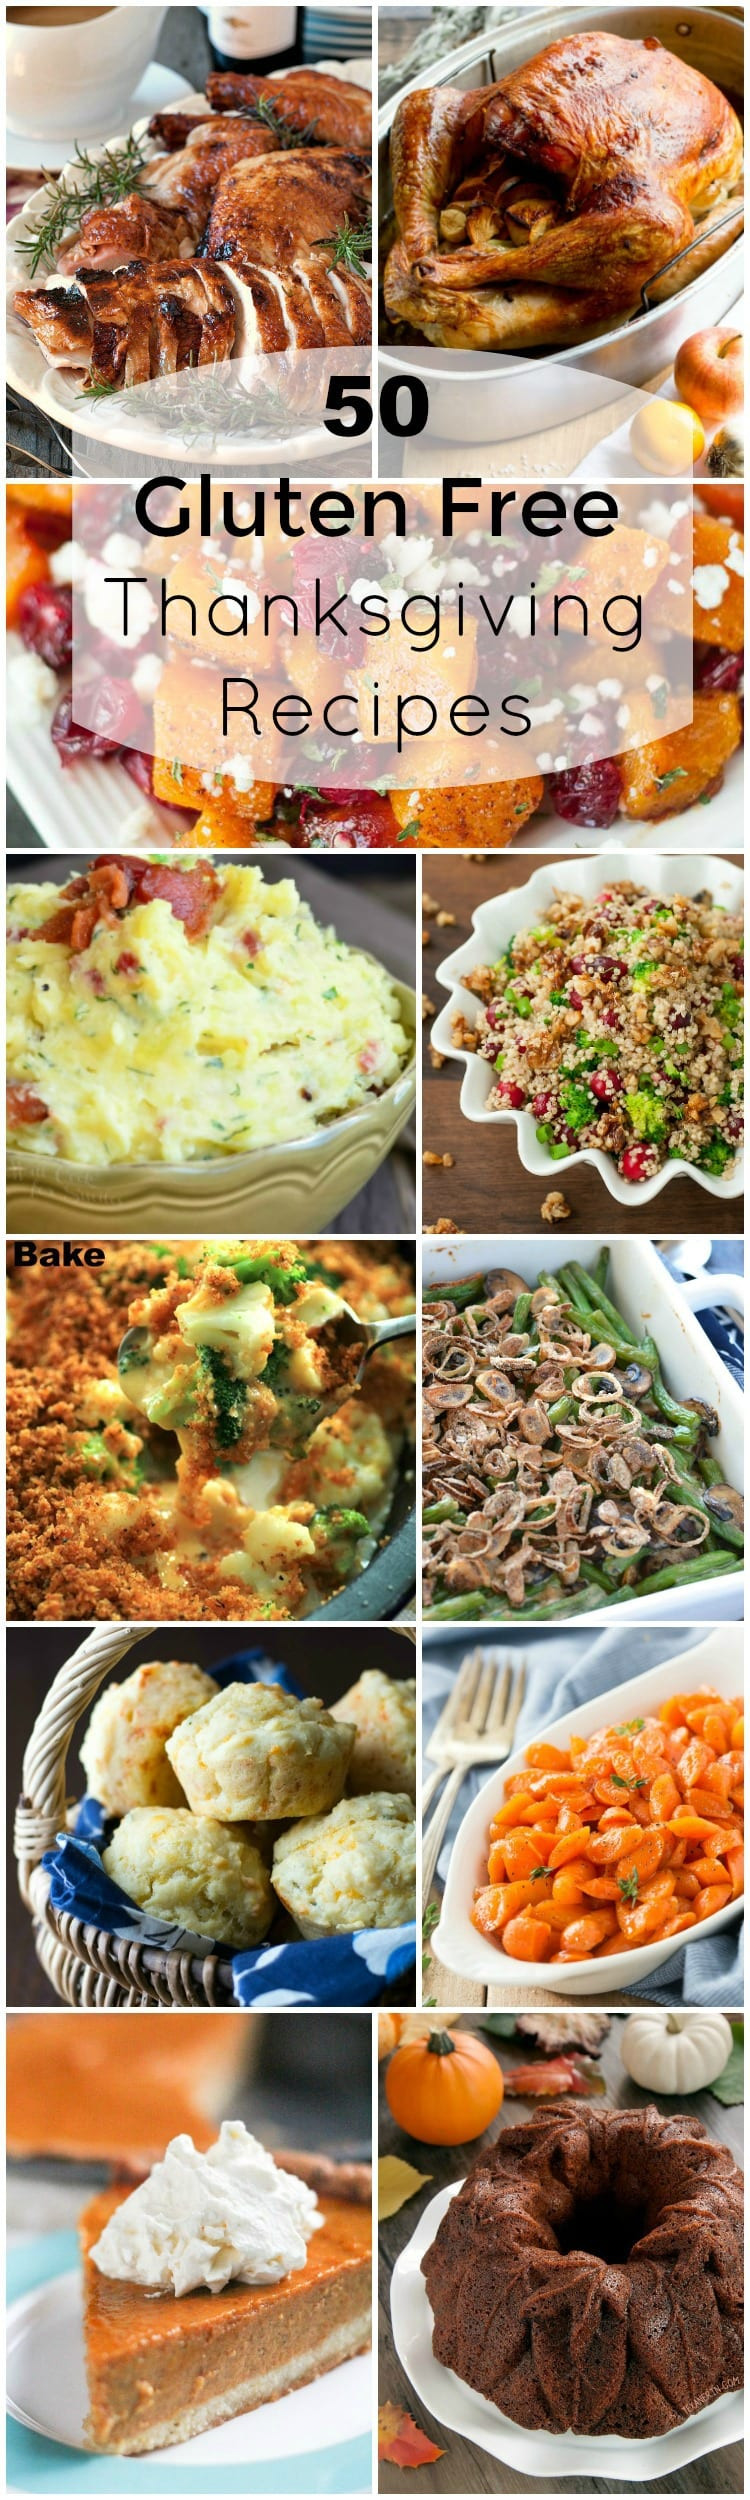 Dairy Free Thanksgiving Recipes
 50 Recipes For A plete Gluten Free Thanksgiving Dinner